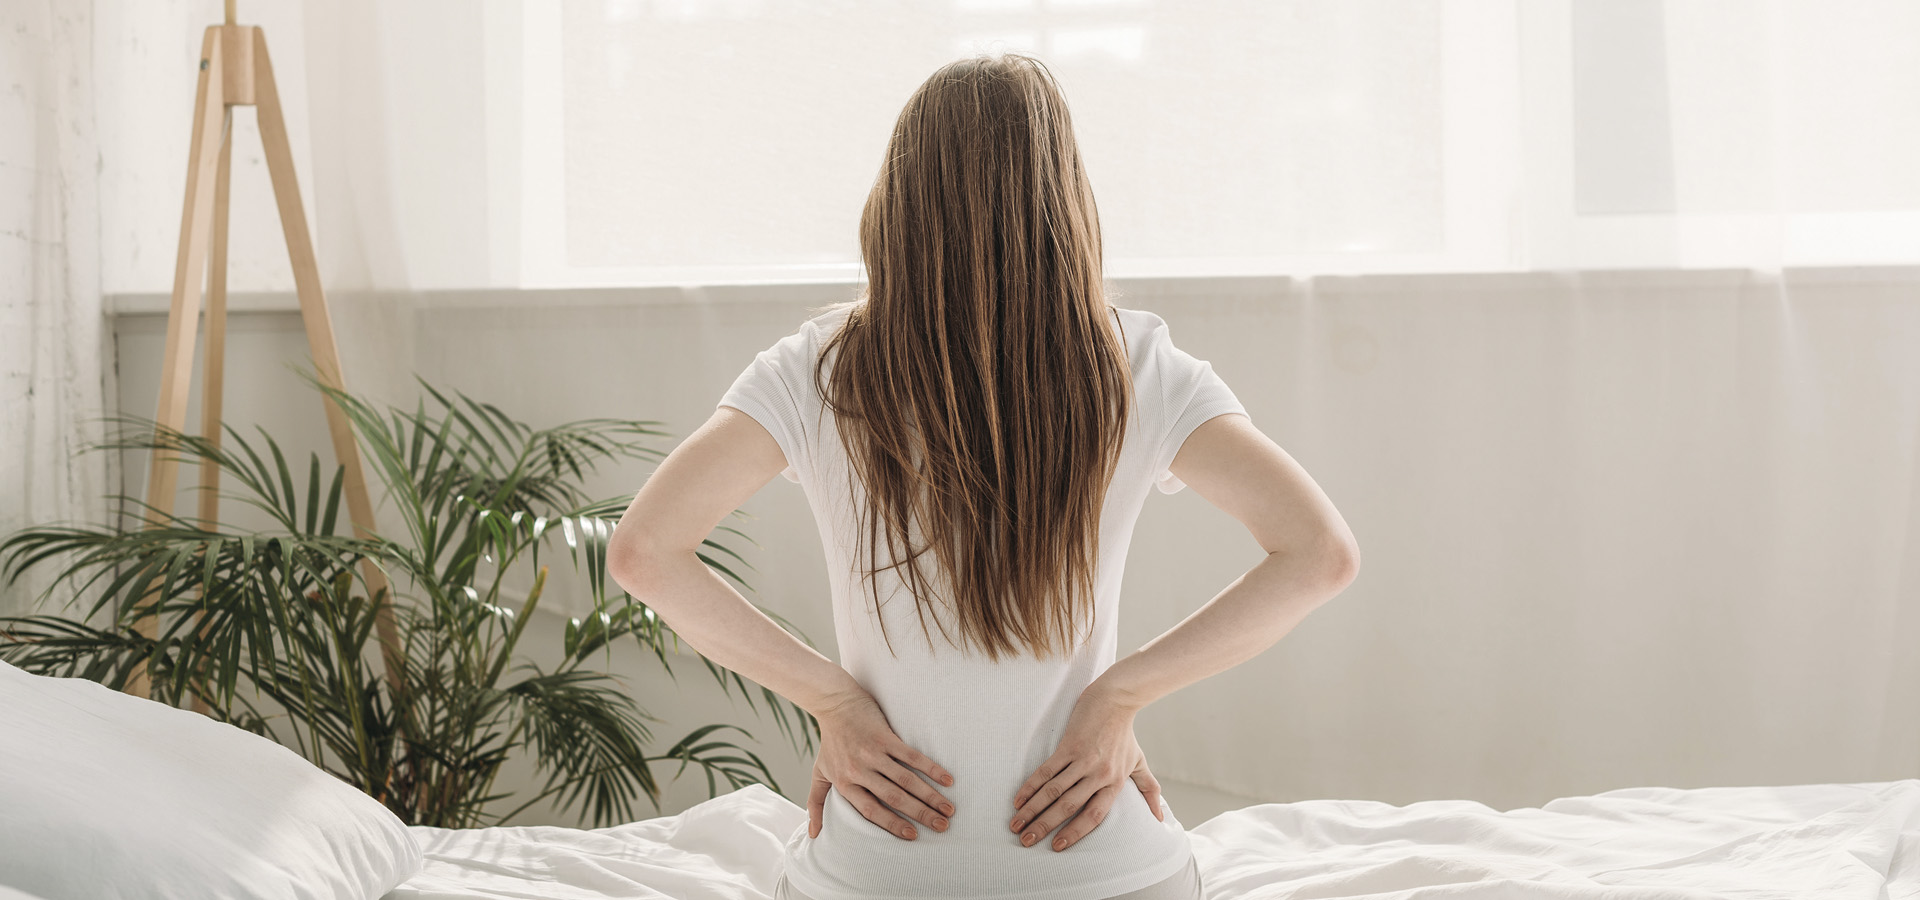 back view of young woman sitting on bed and suffering from back